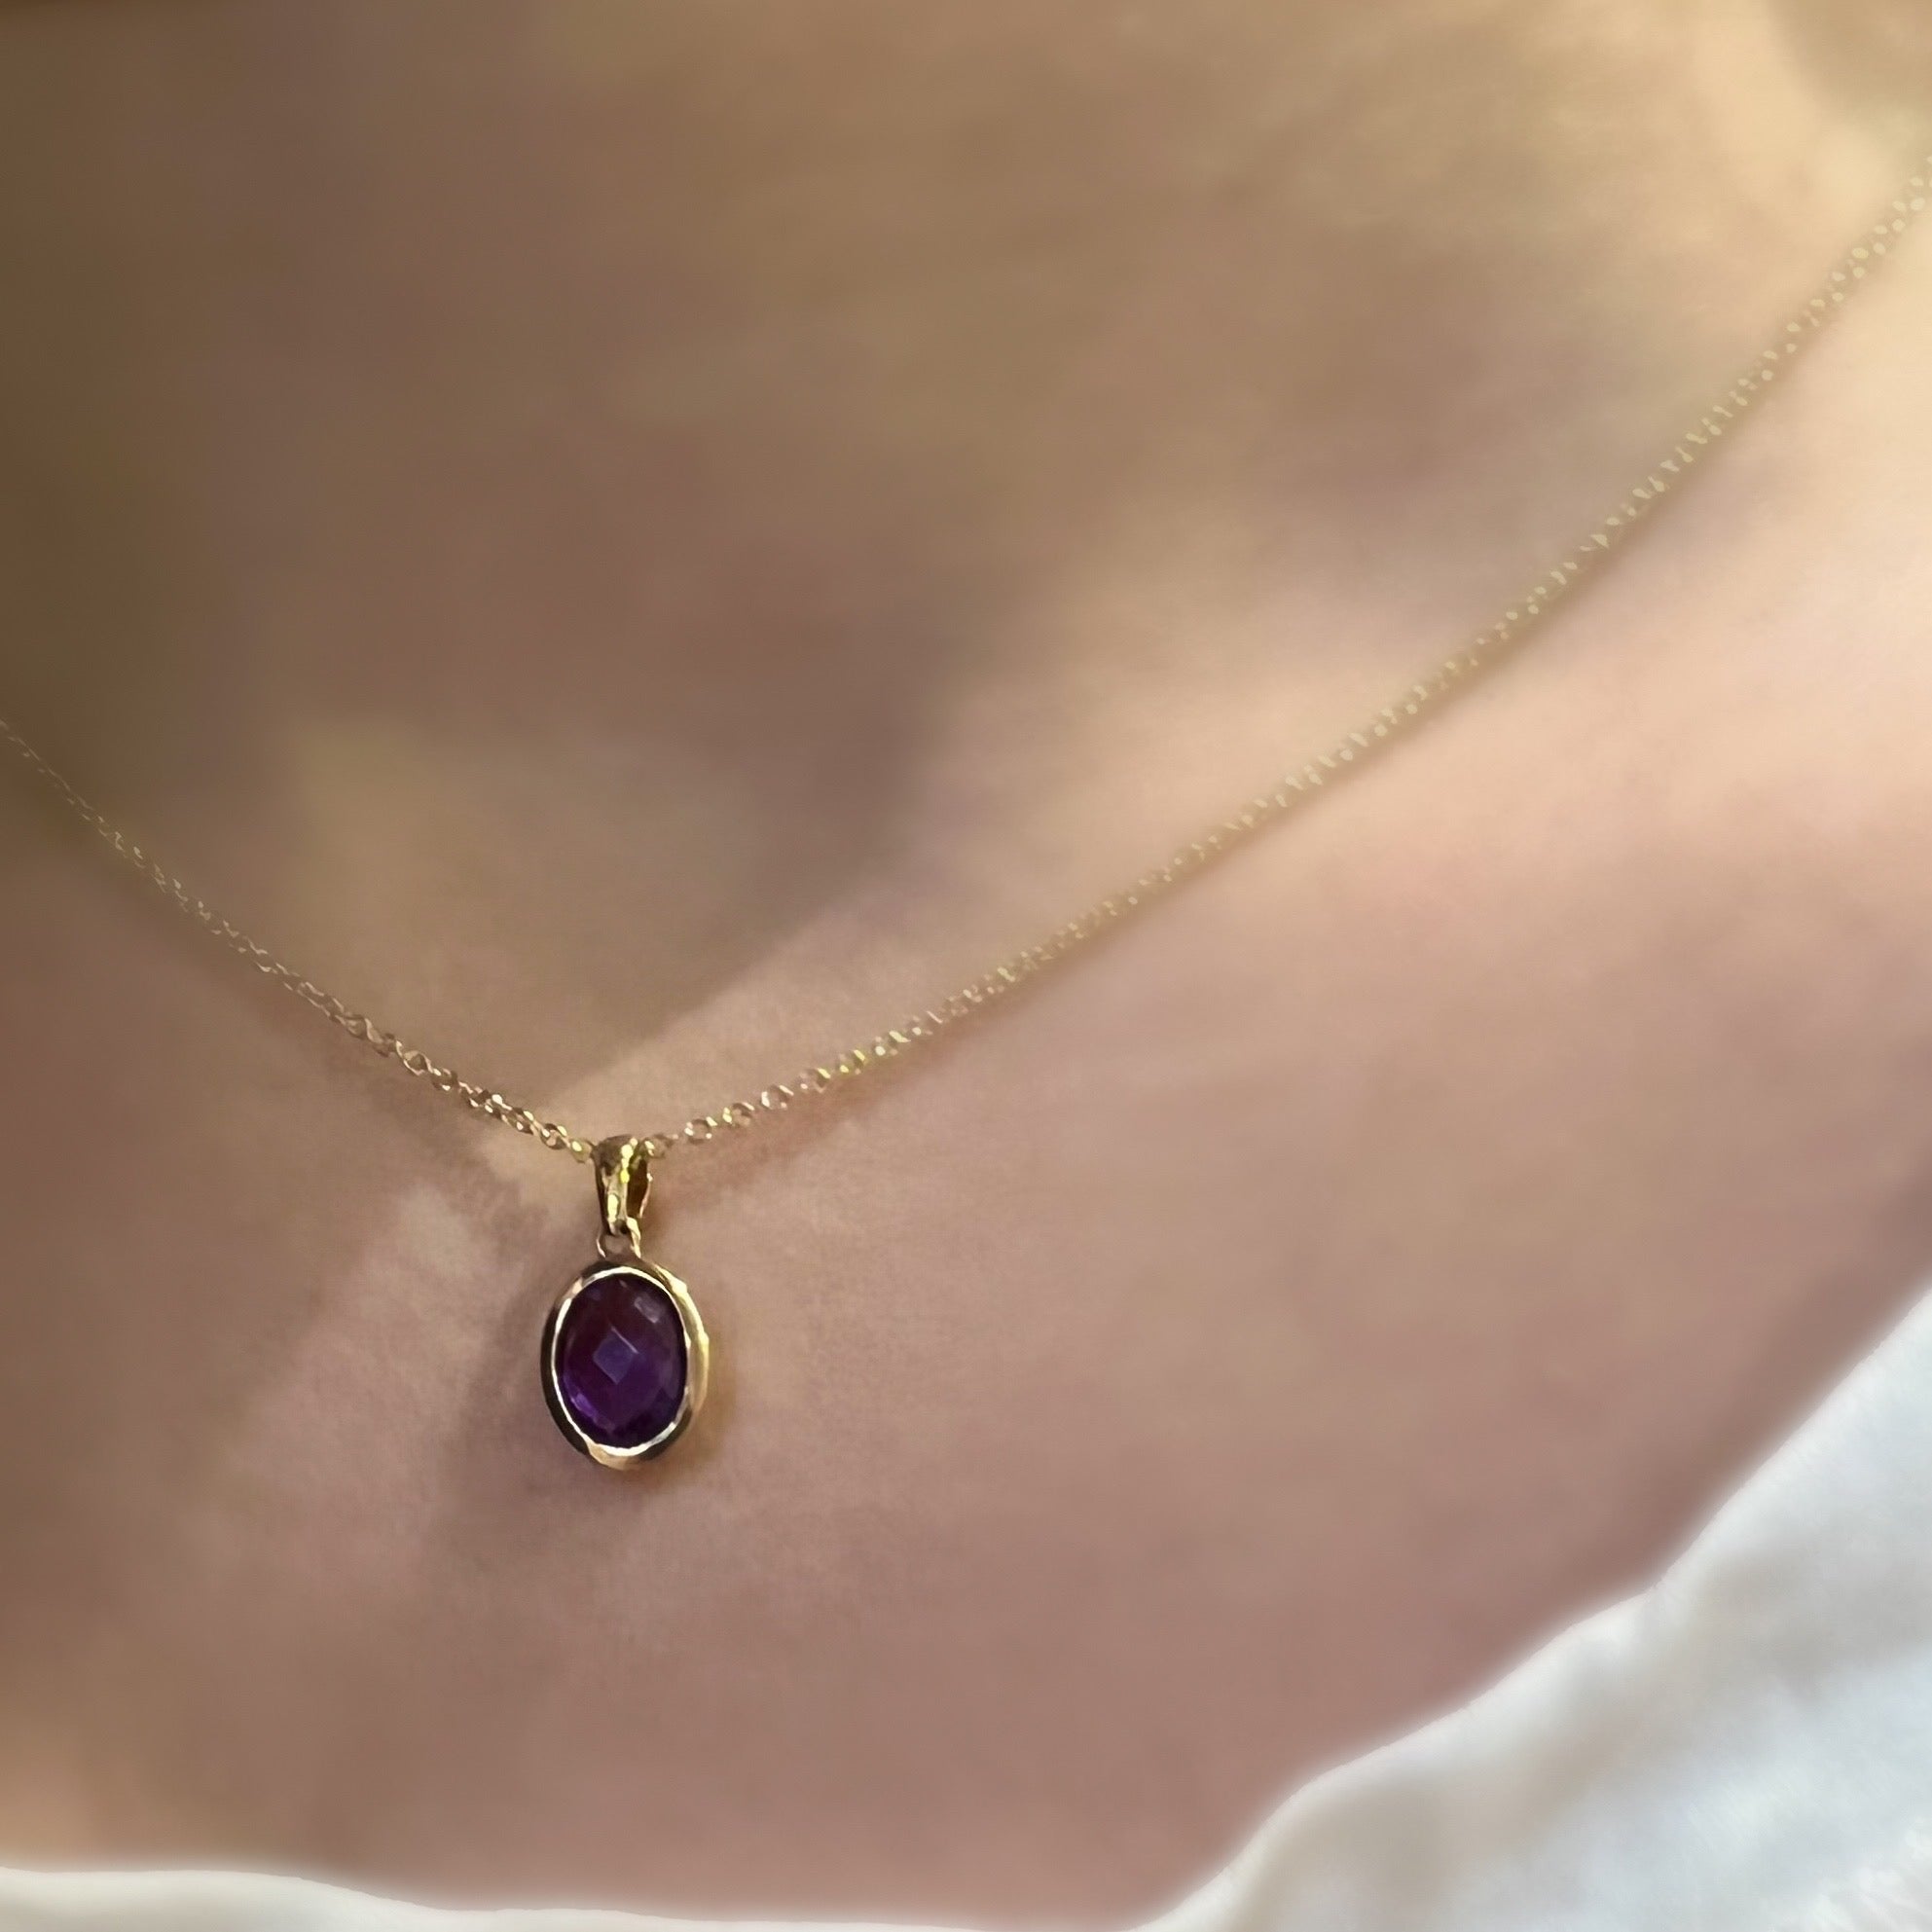 9ct Yellow Gold 1.14ct Oval Cabachon Amethyst Pendant